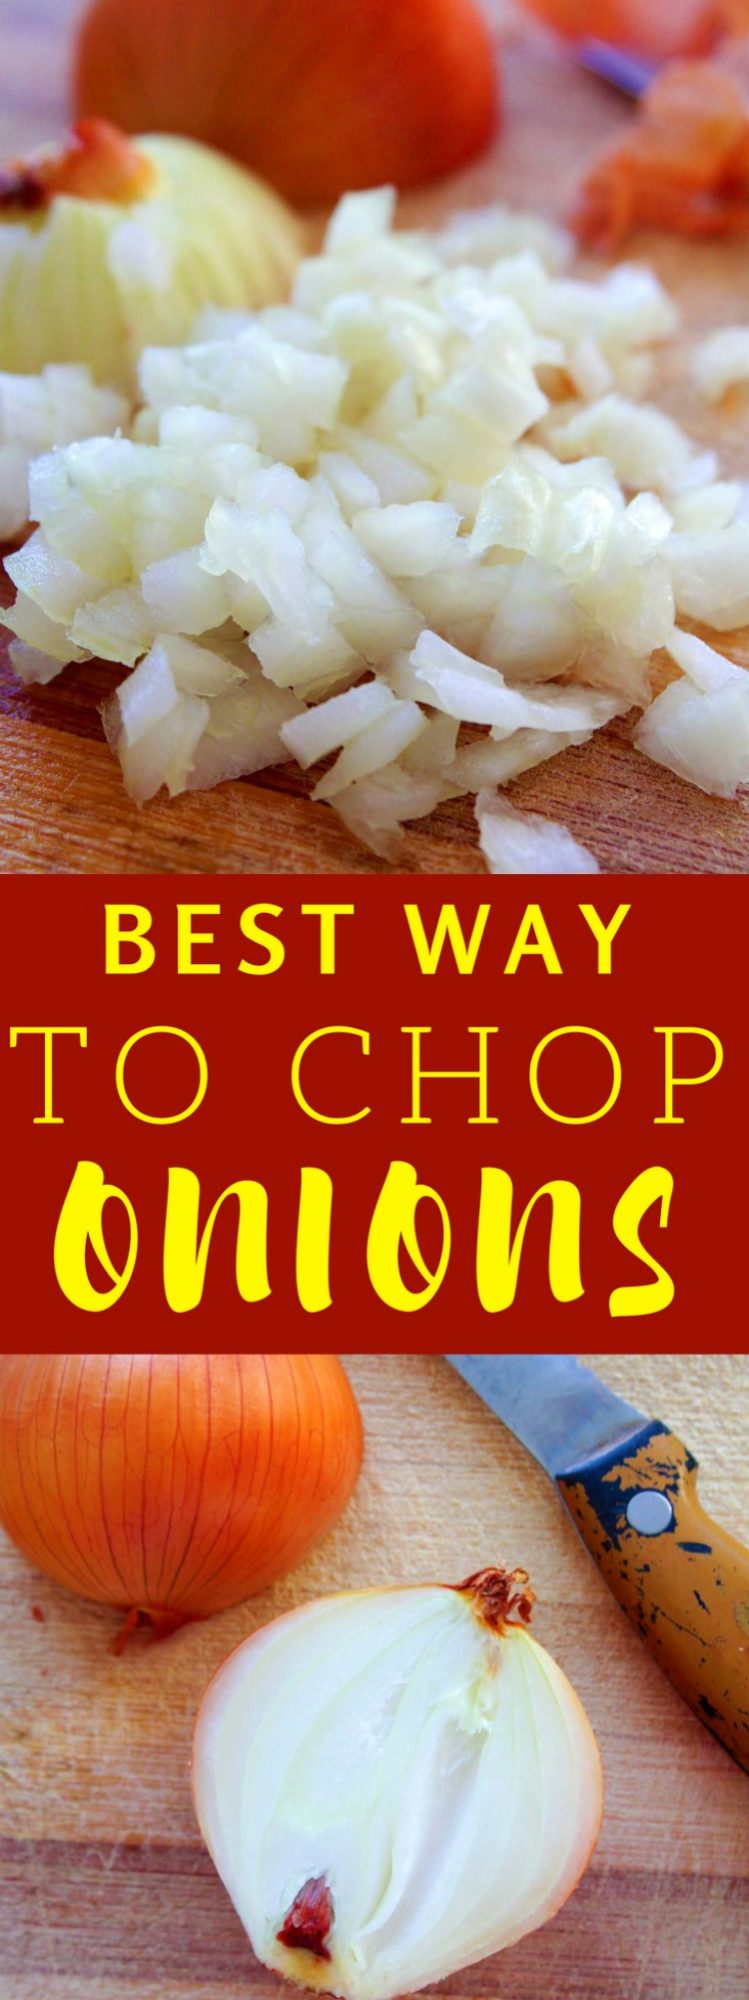 Best Way To Chop Onions